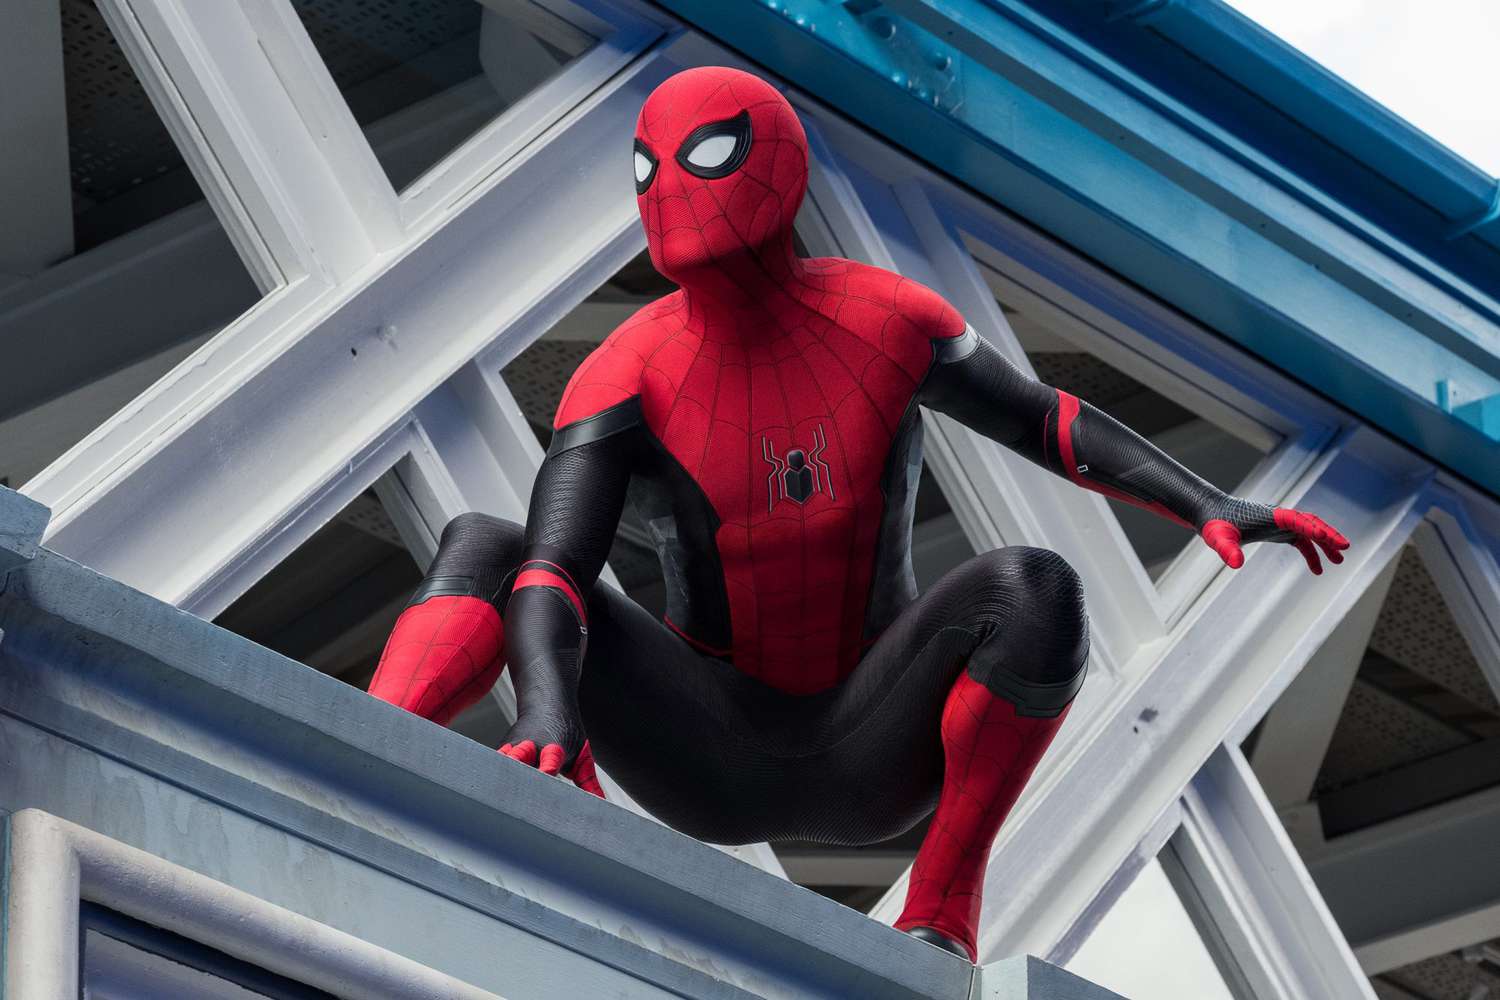 Disney sues to keep full rights to Marvel characters including Spider-Man, Black Widow, and more - EW.com